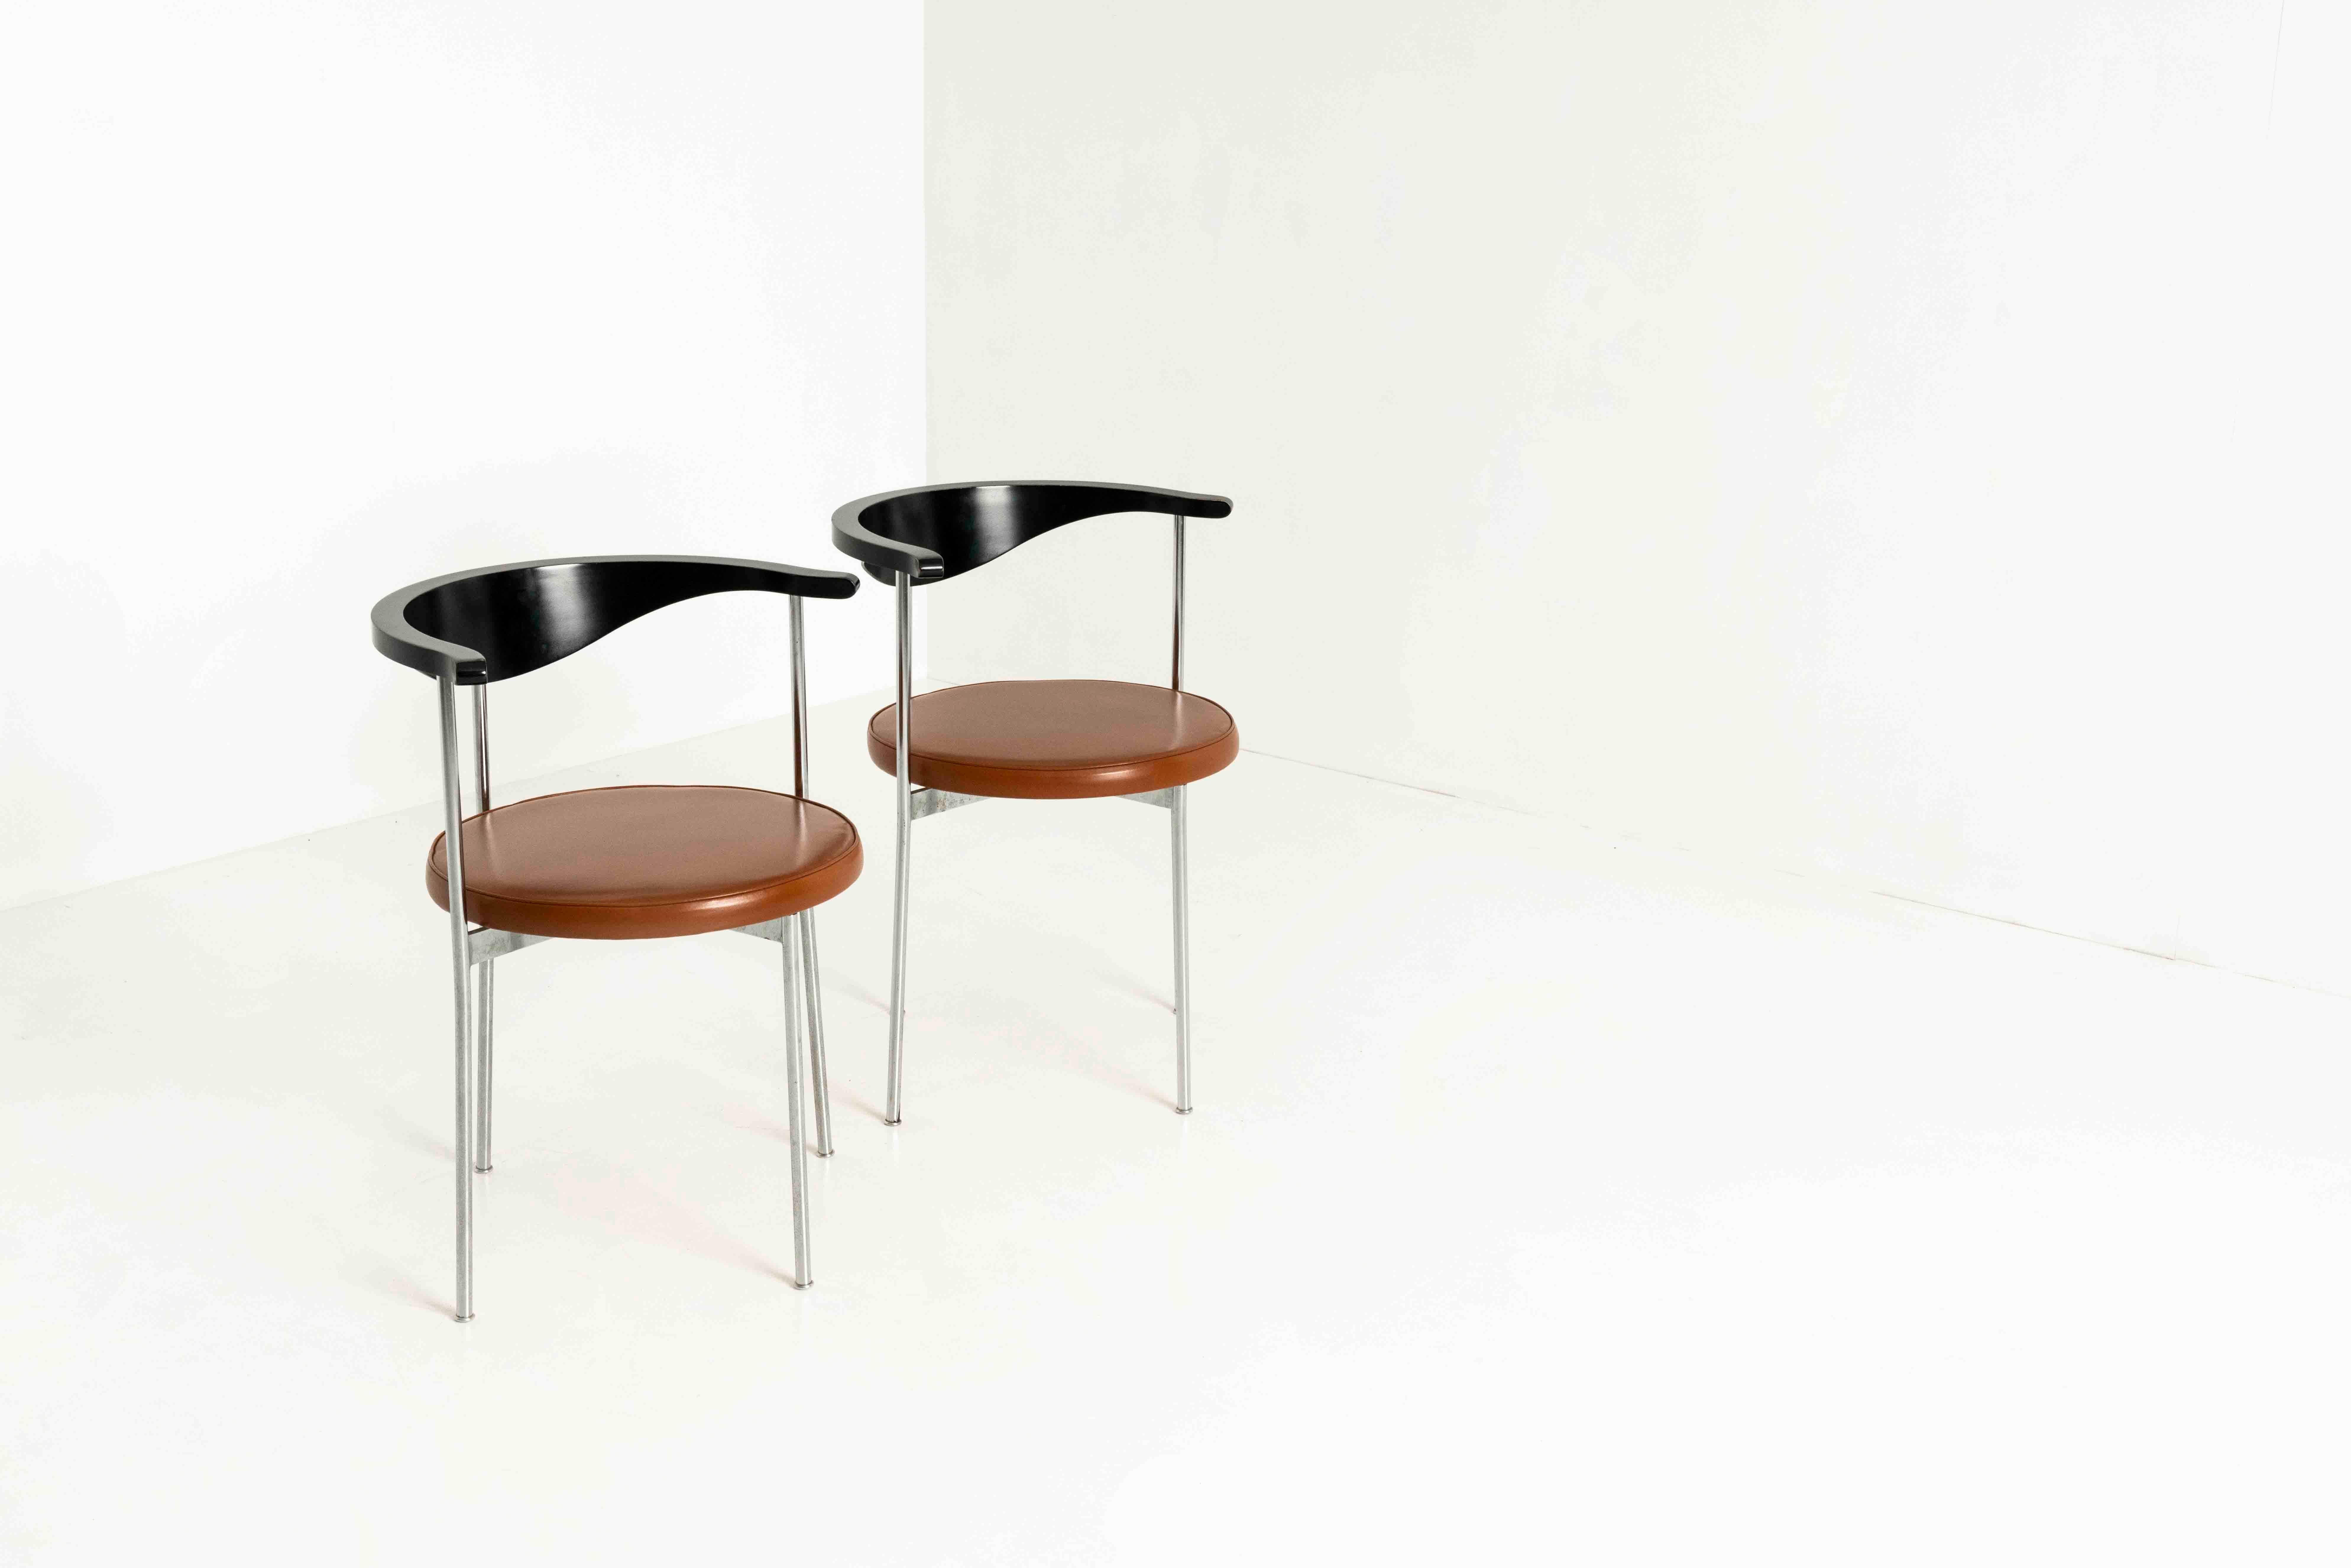 Set of Two Frederick Sieck chairs for Fritz Hansen from Denmark, the 1960s. These chairs, with model 3200, have a tan leather seating area and a black-colored back that is nicely shaped. The base is of steel. The chair has an outward curving top